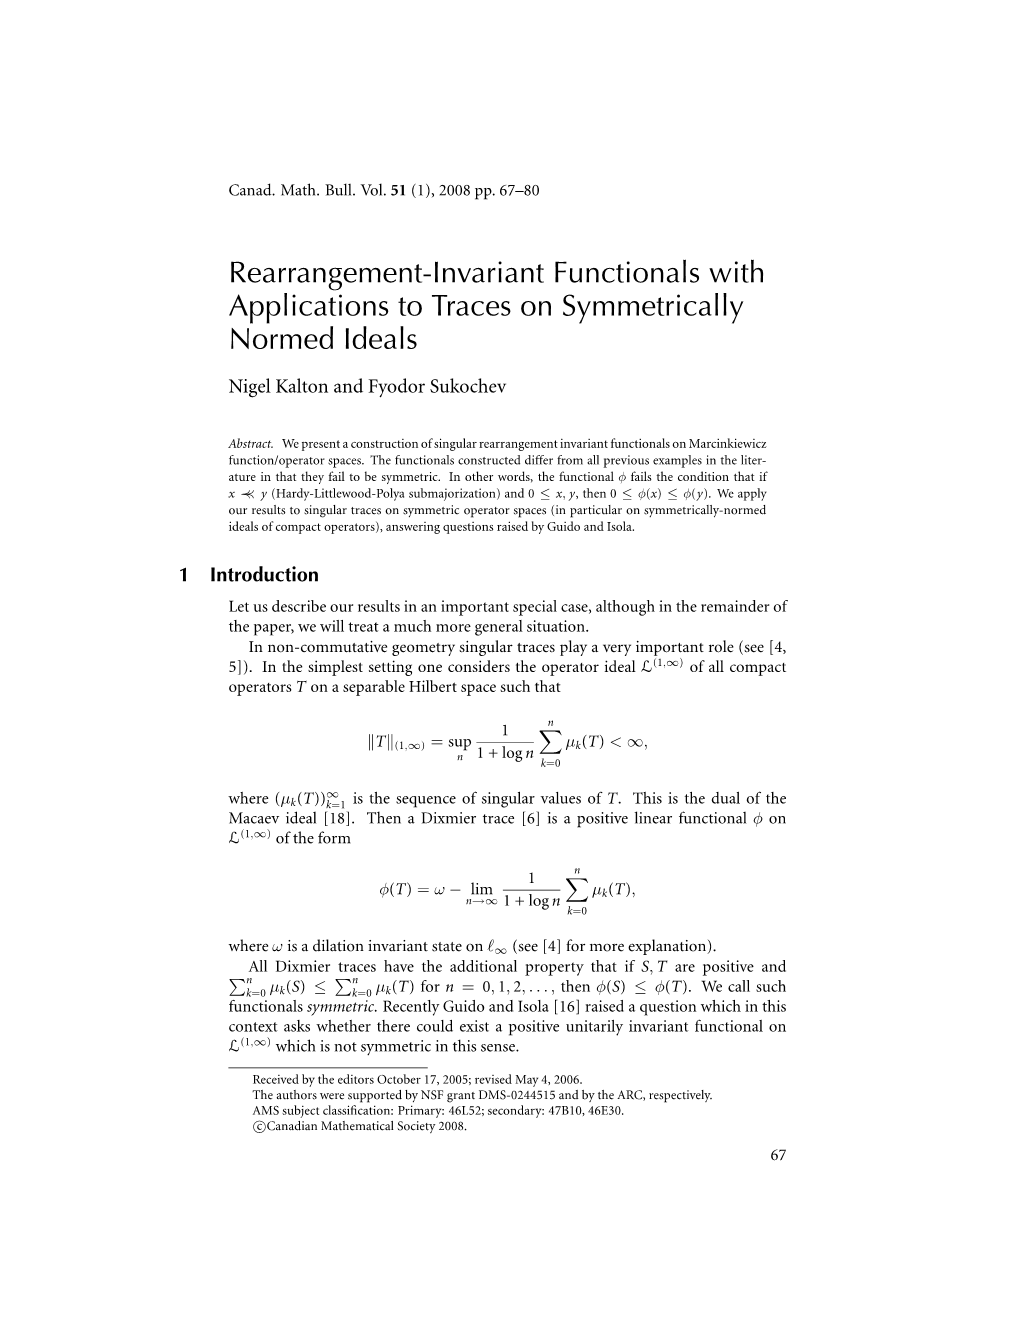 Rearrangement-Invariant Functionals with Applications to Traces on Symmetrically Normed Ideals